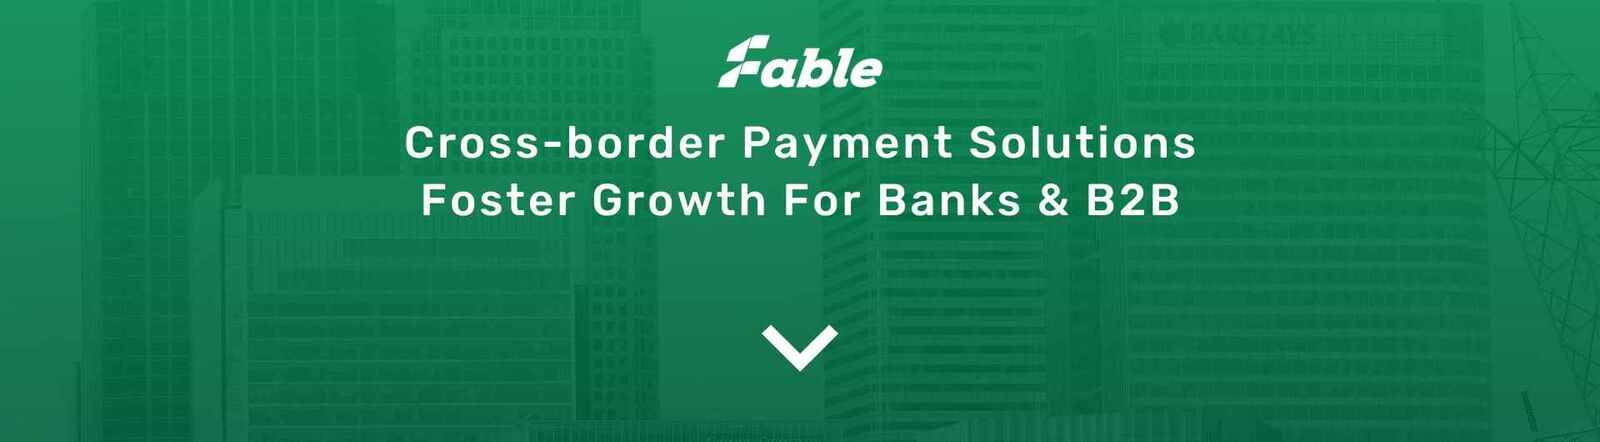 Cross-border Payment Solutions Foster Growth For Banks & B2B